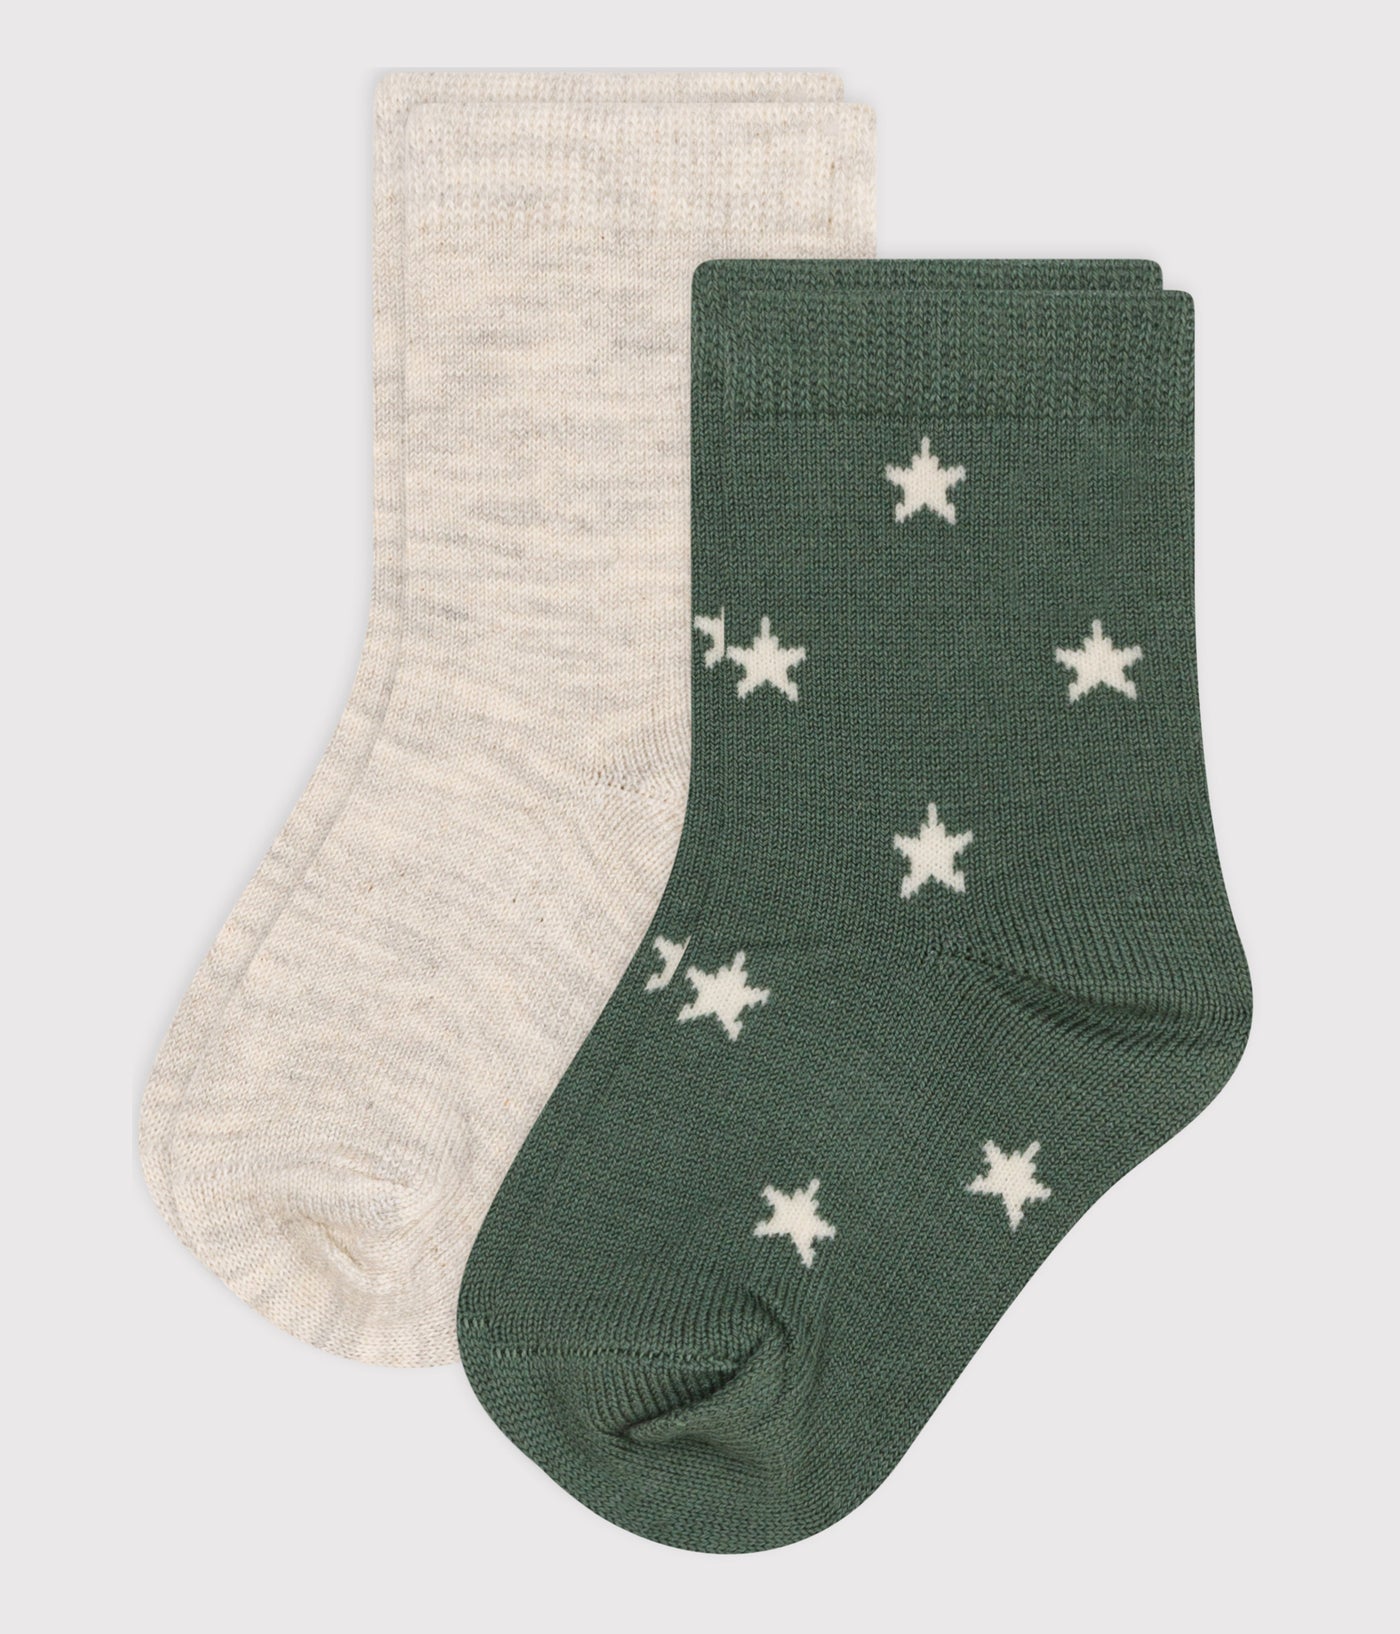 BABIES' STARRY COTTON SOCKS - 2-PACK